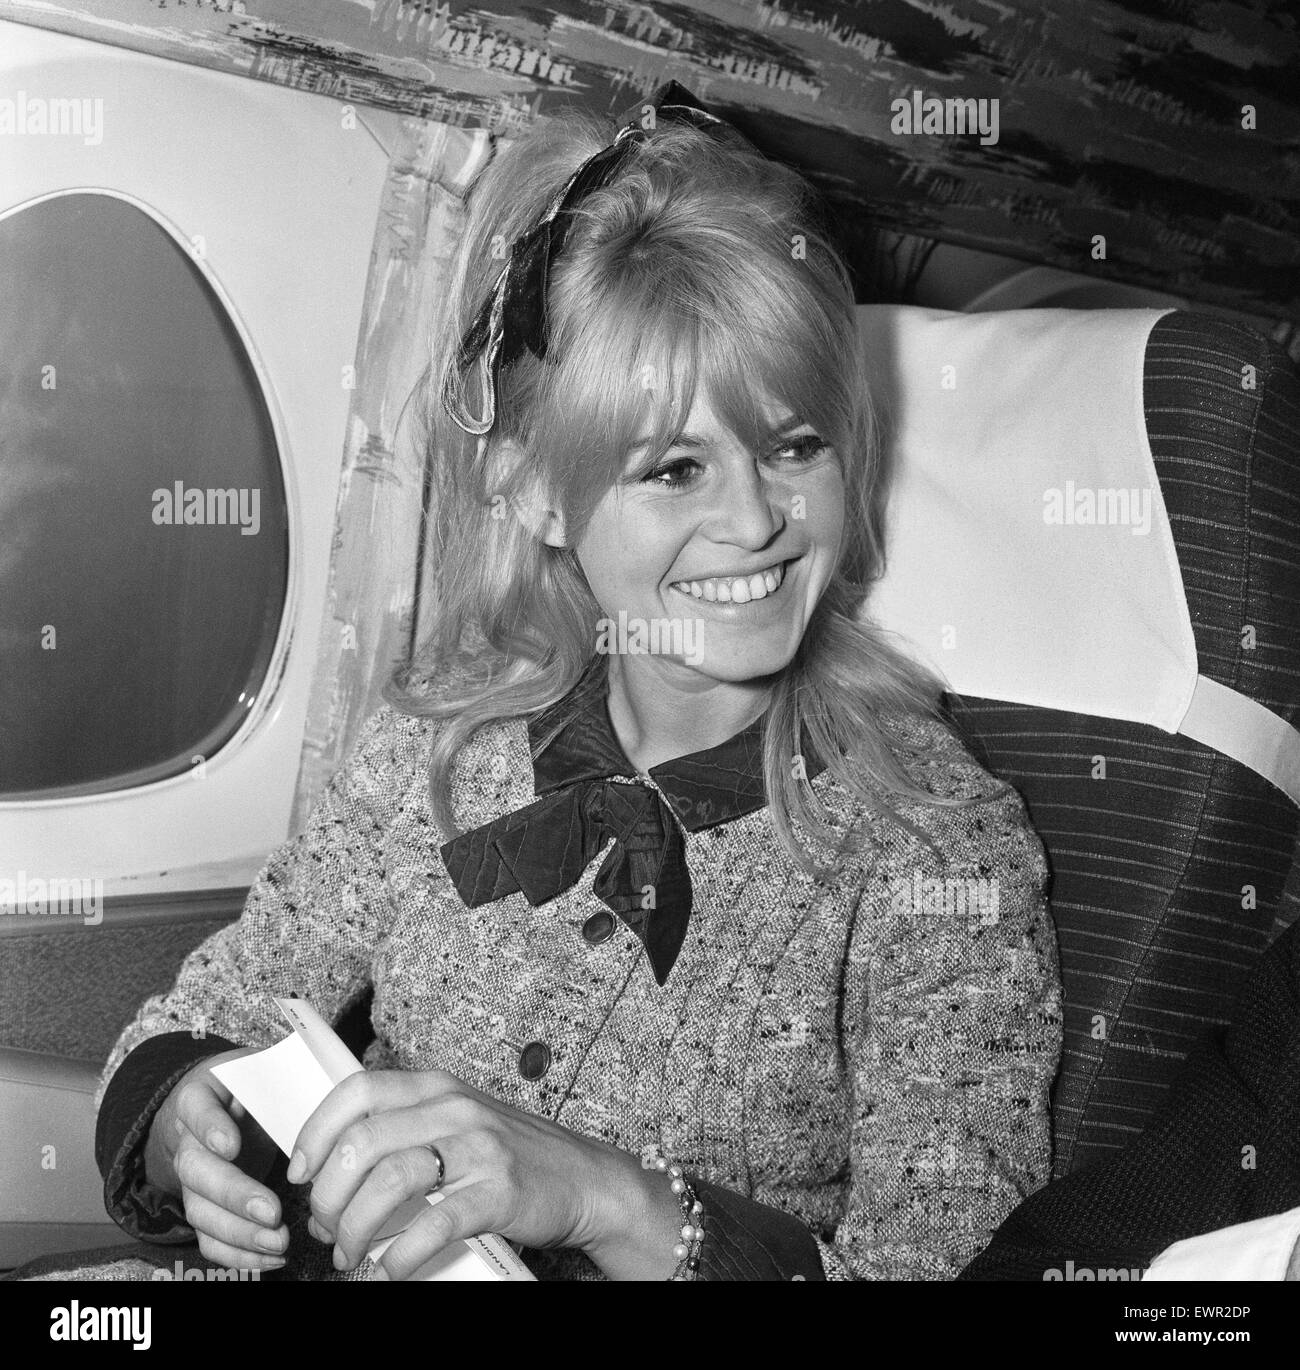 Brigitte Bardot, french film actress, flies in from Orly Airport Paris, to complete scenes on her new film, The Adorable Idiot, in London, pictured arriving at London Heathrow Airport and on aircraft, being interviewed by The Daily Mirror's Donald Zec, 23 Stock Photo